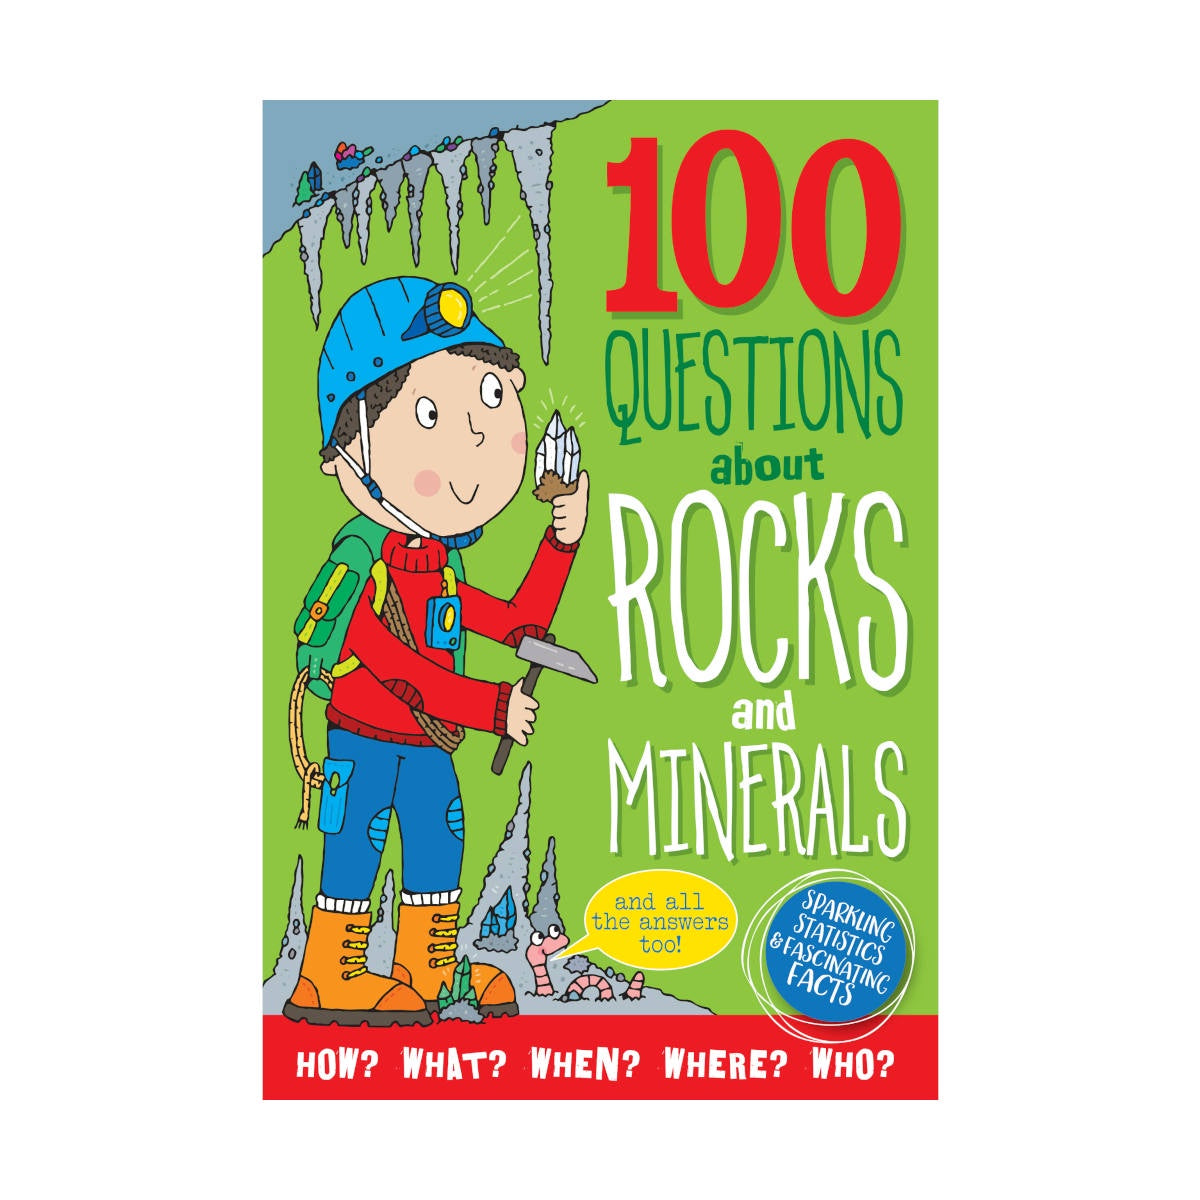 100 Questions About - Rocks and Minerals - Children's Book